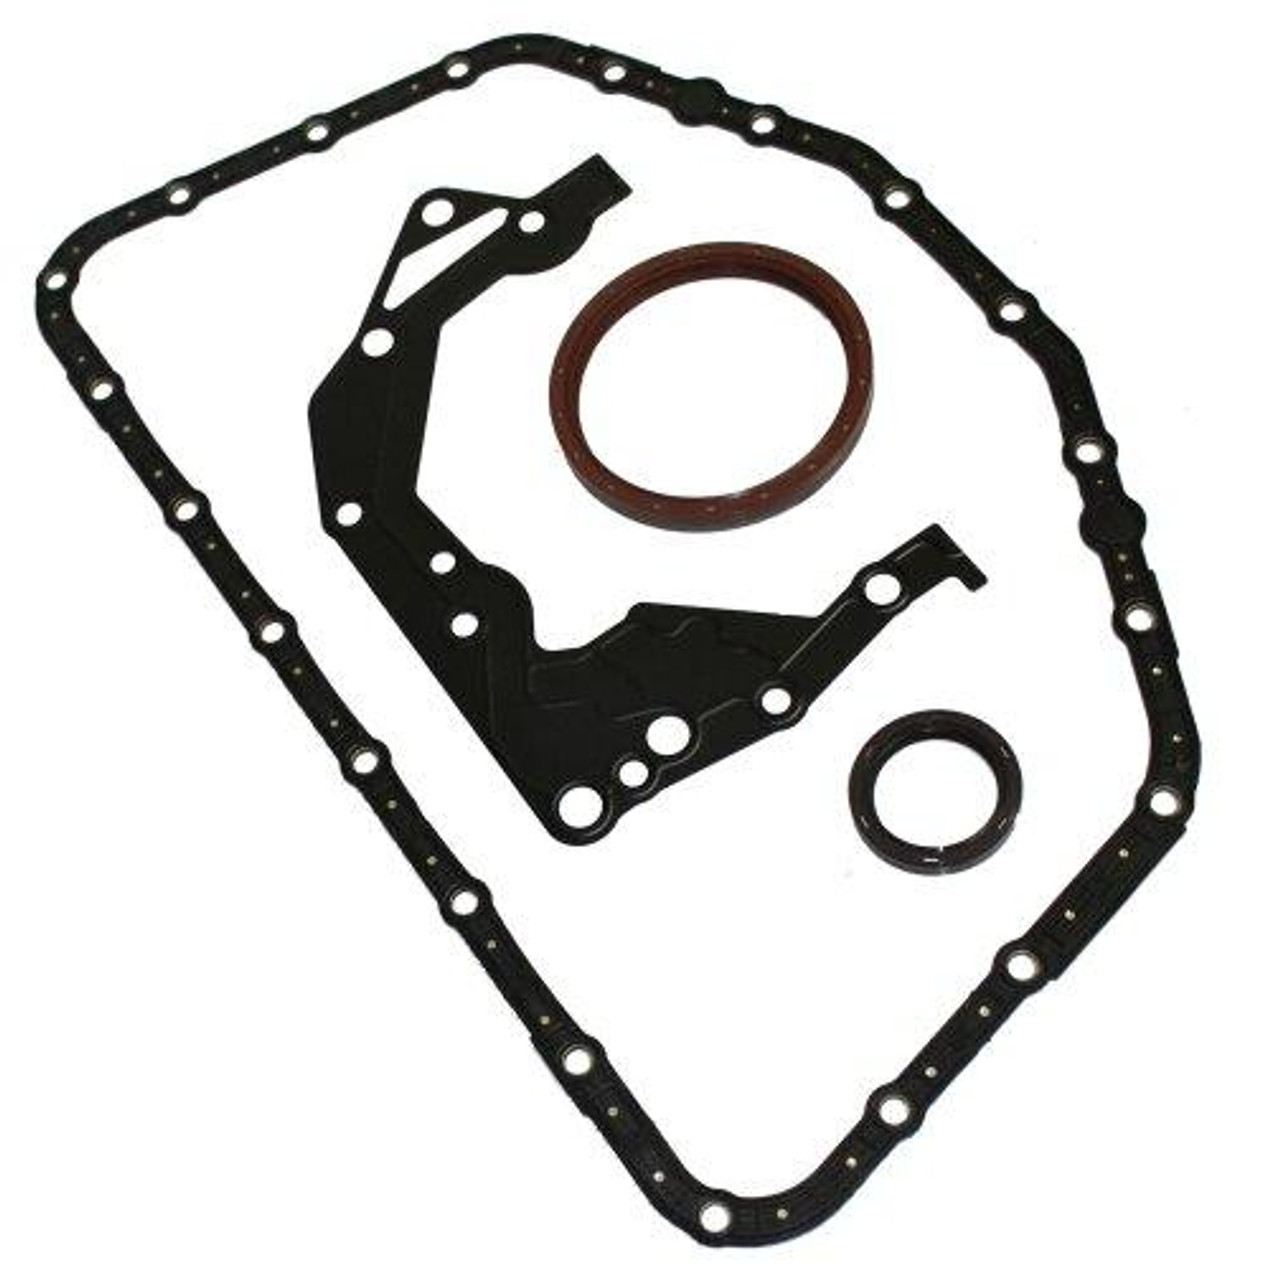 Lower Gasket Set - 1997 Cadillac Catera 3.0L Engine Parts # LGS3105ZE1